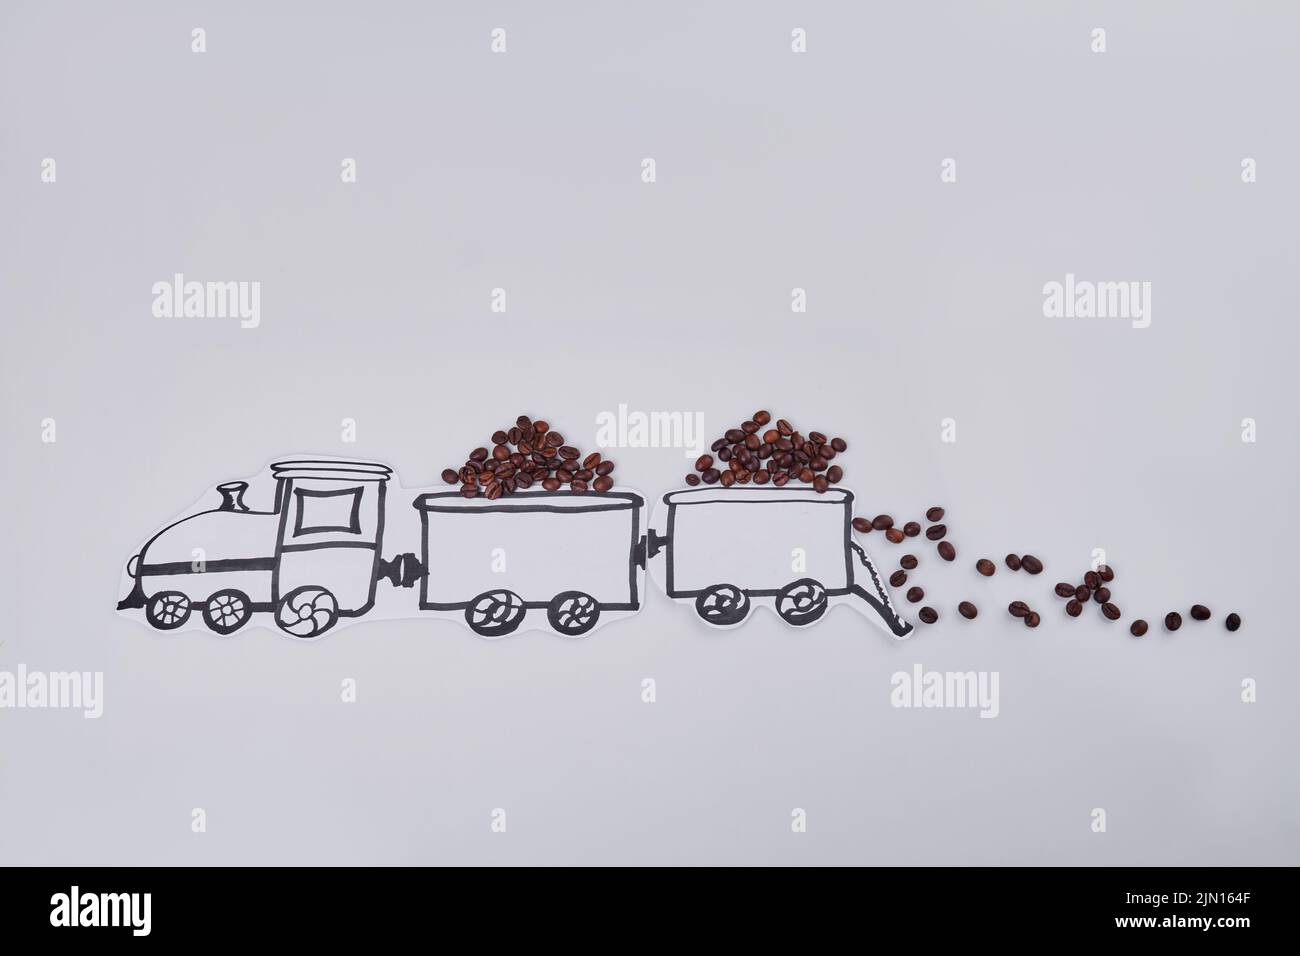 Cartoon train full of coffee beans on white background. Hand drawn locomotive with wagons. Stock Photo